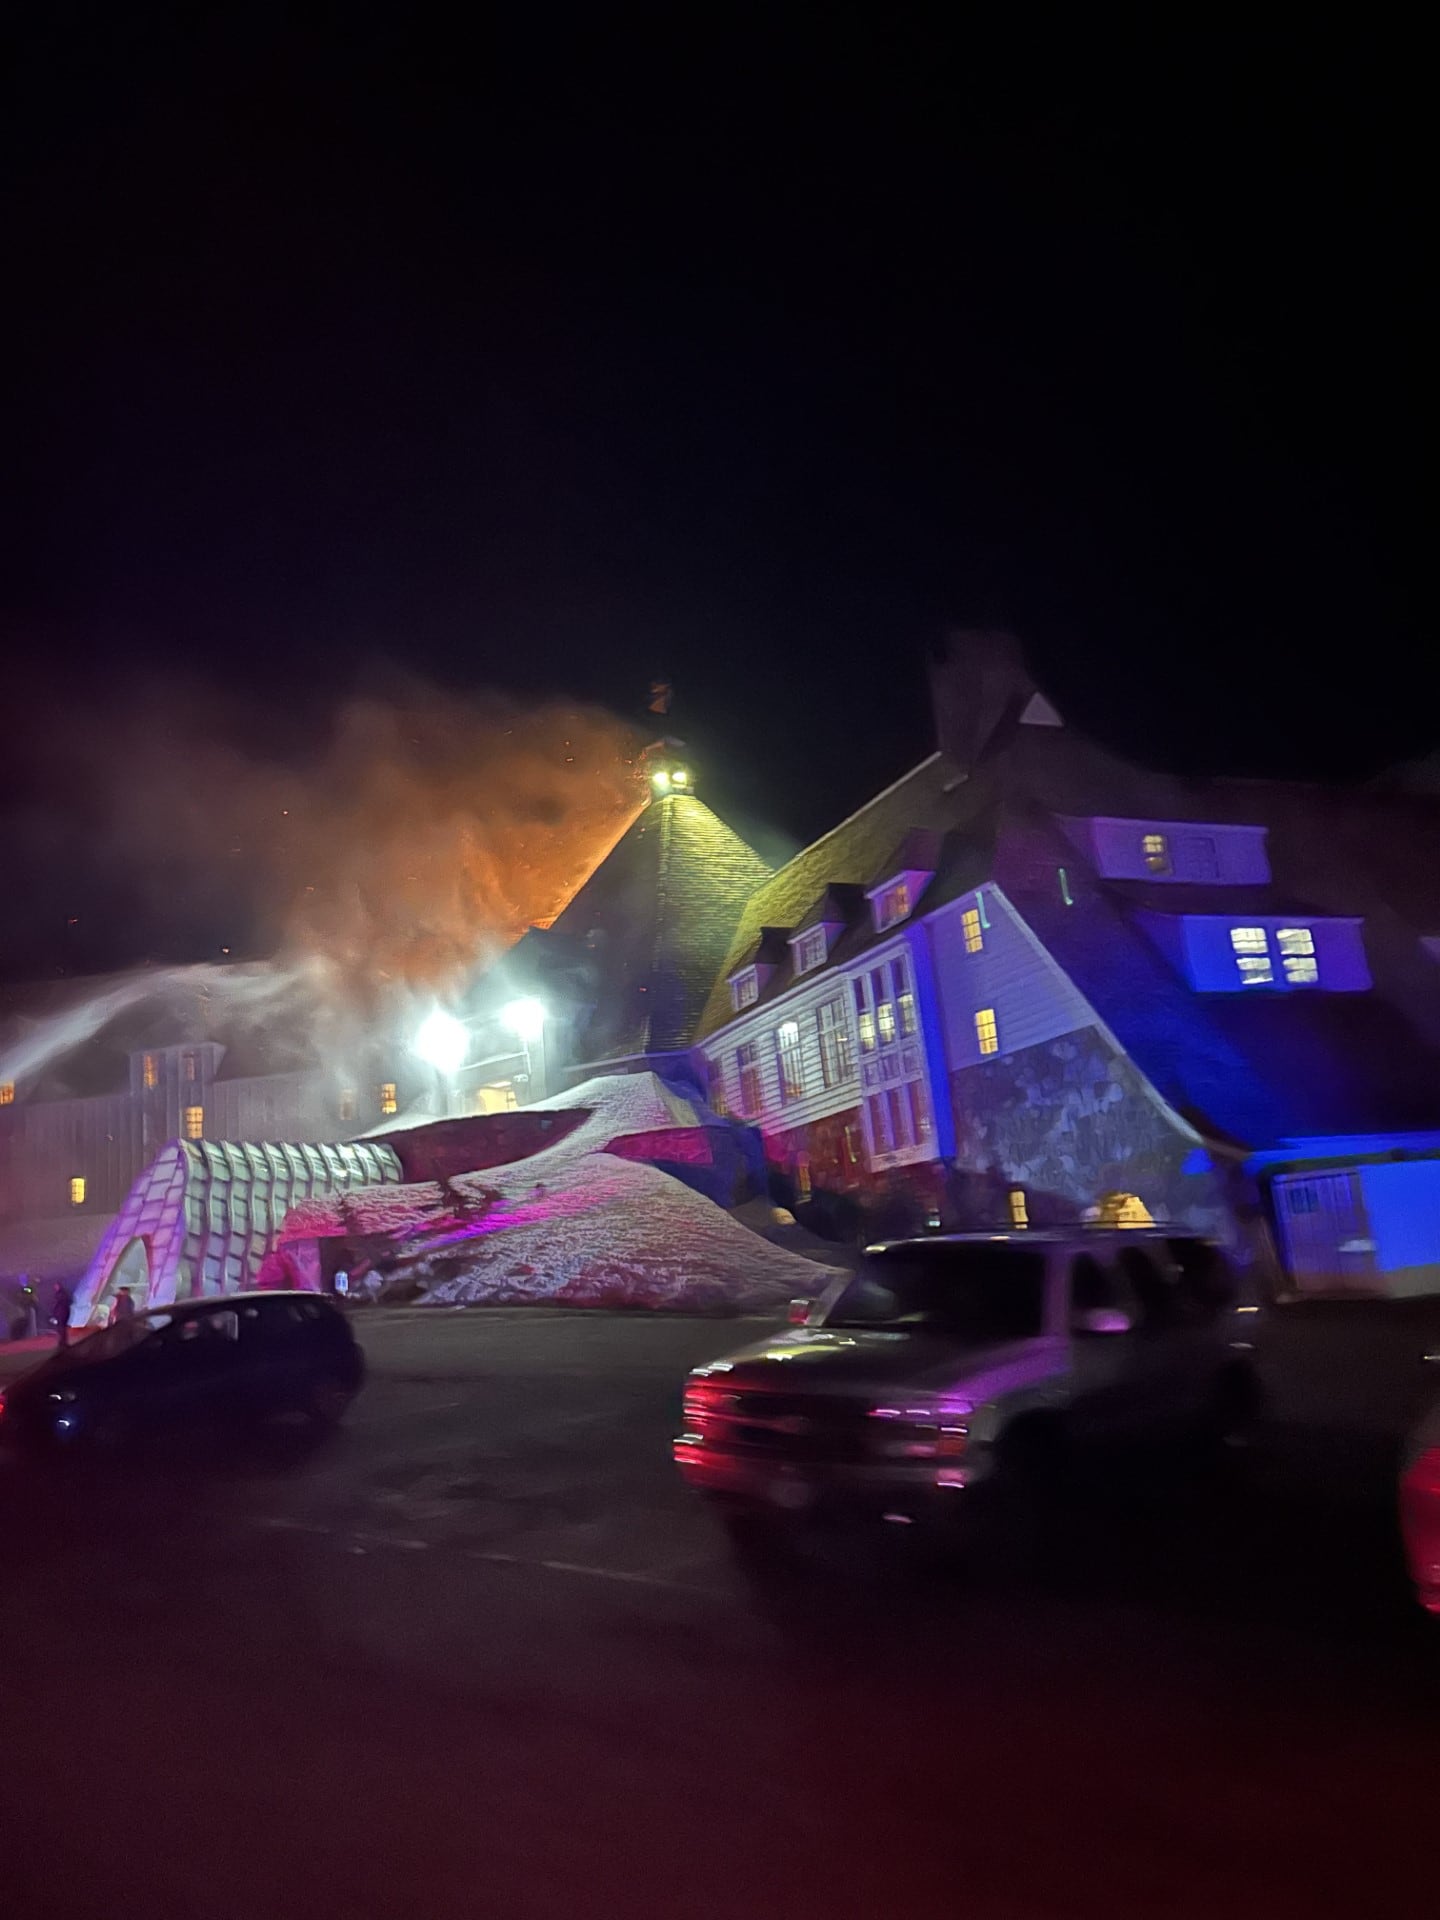 Crews attempt to extinguish a fire in the attic of Timberline Lodge on Mount Hood. Ore., on April 18. The fire was extinguished early Friday morning and no injuries were reported.